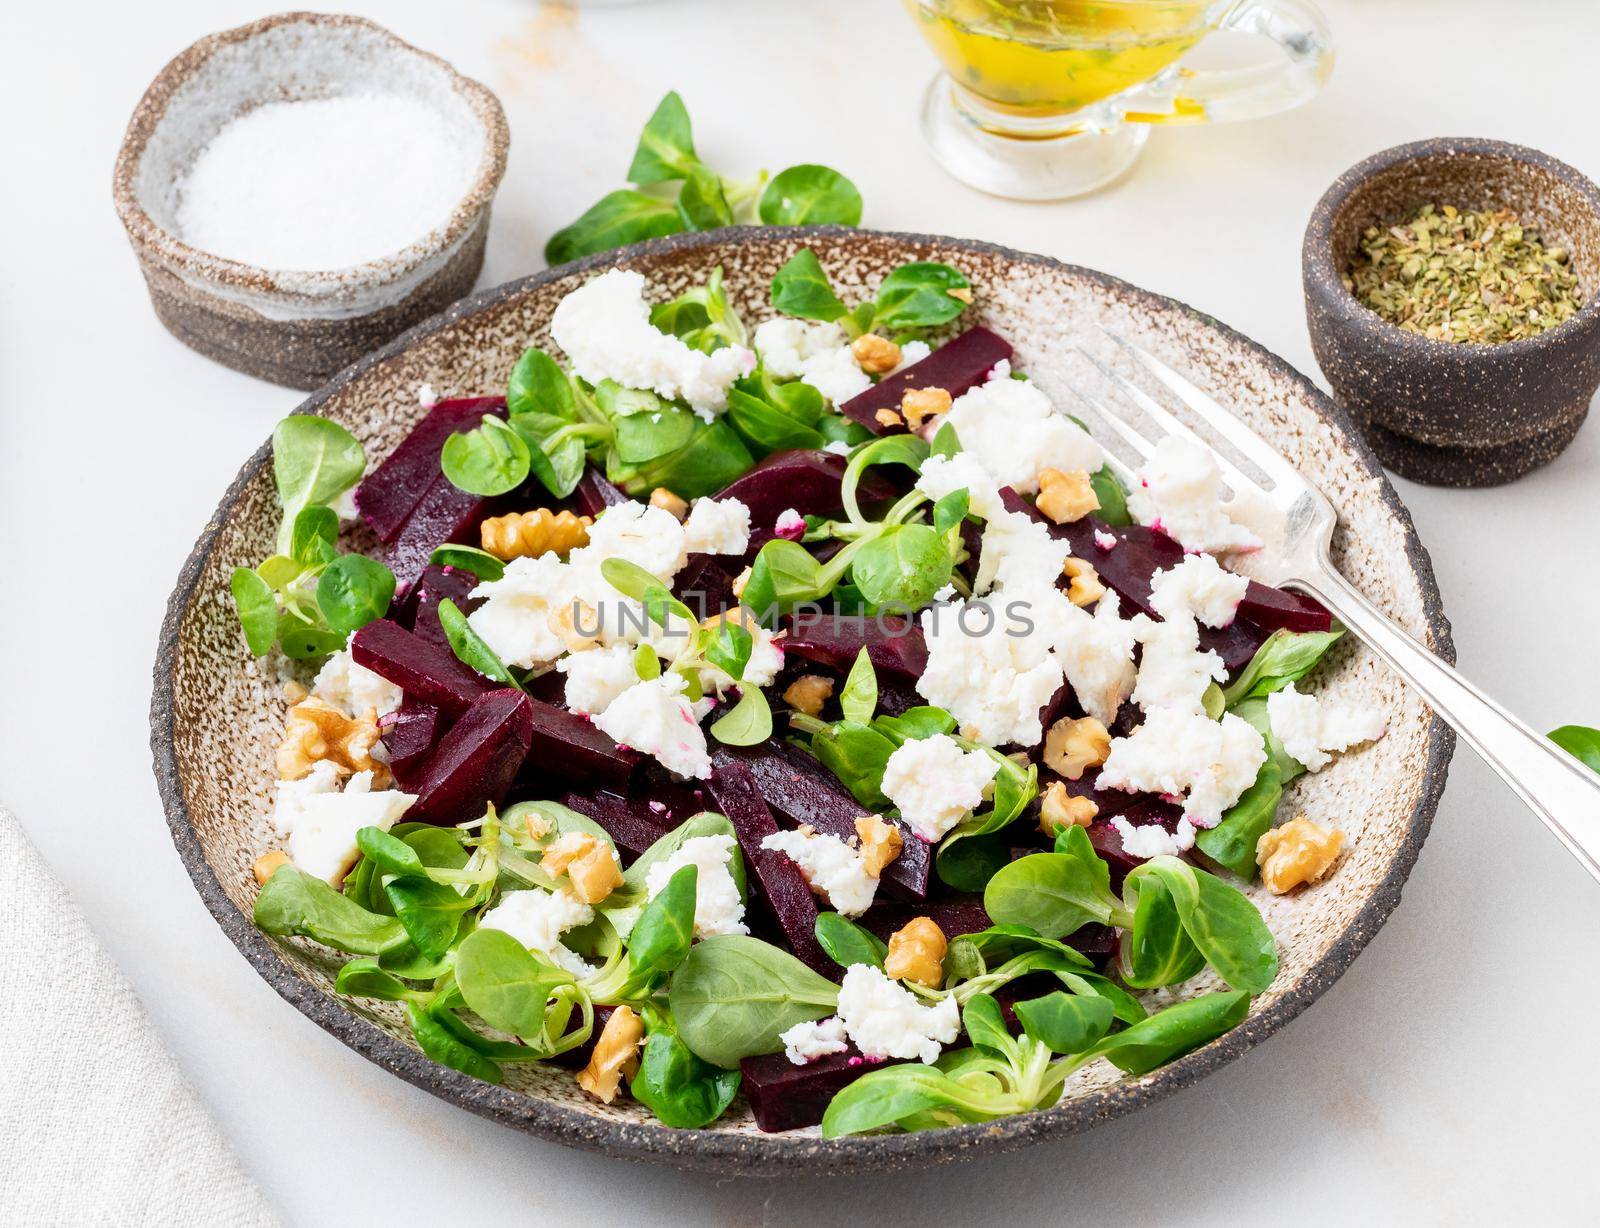 beetroot salad with feta, cheese, walnuts, corn salad on white table, side view